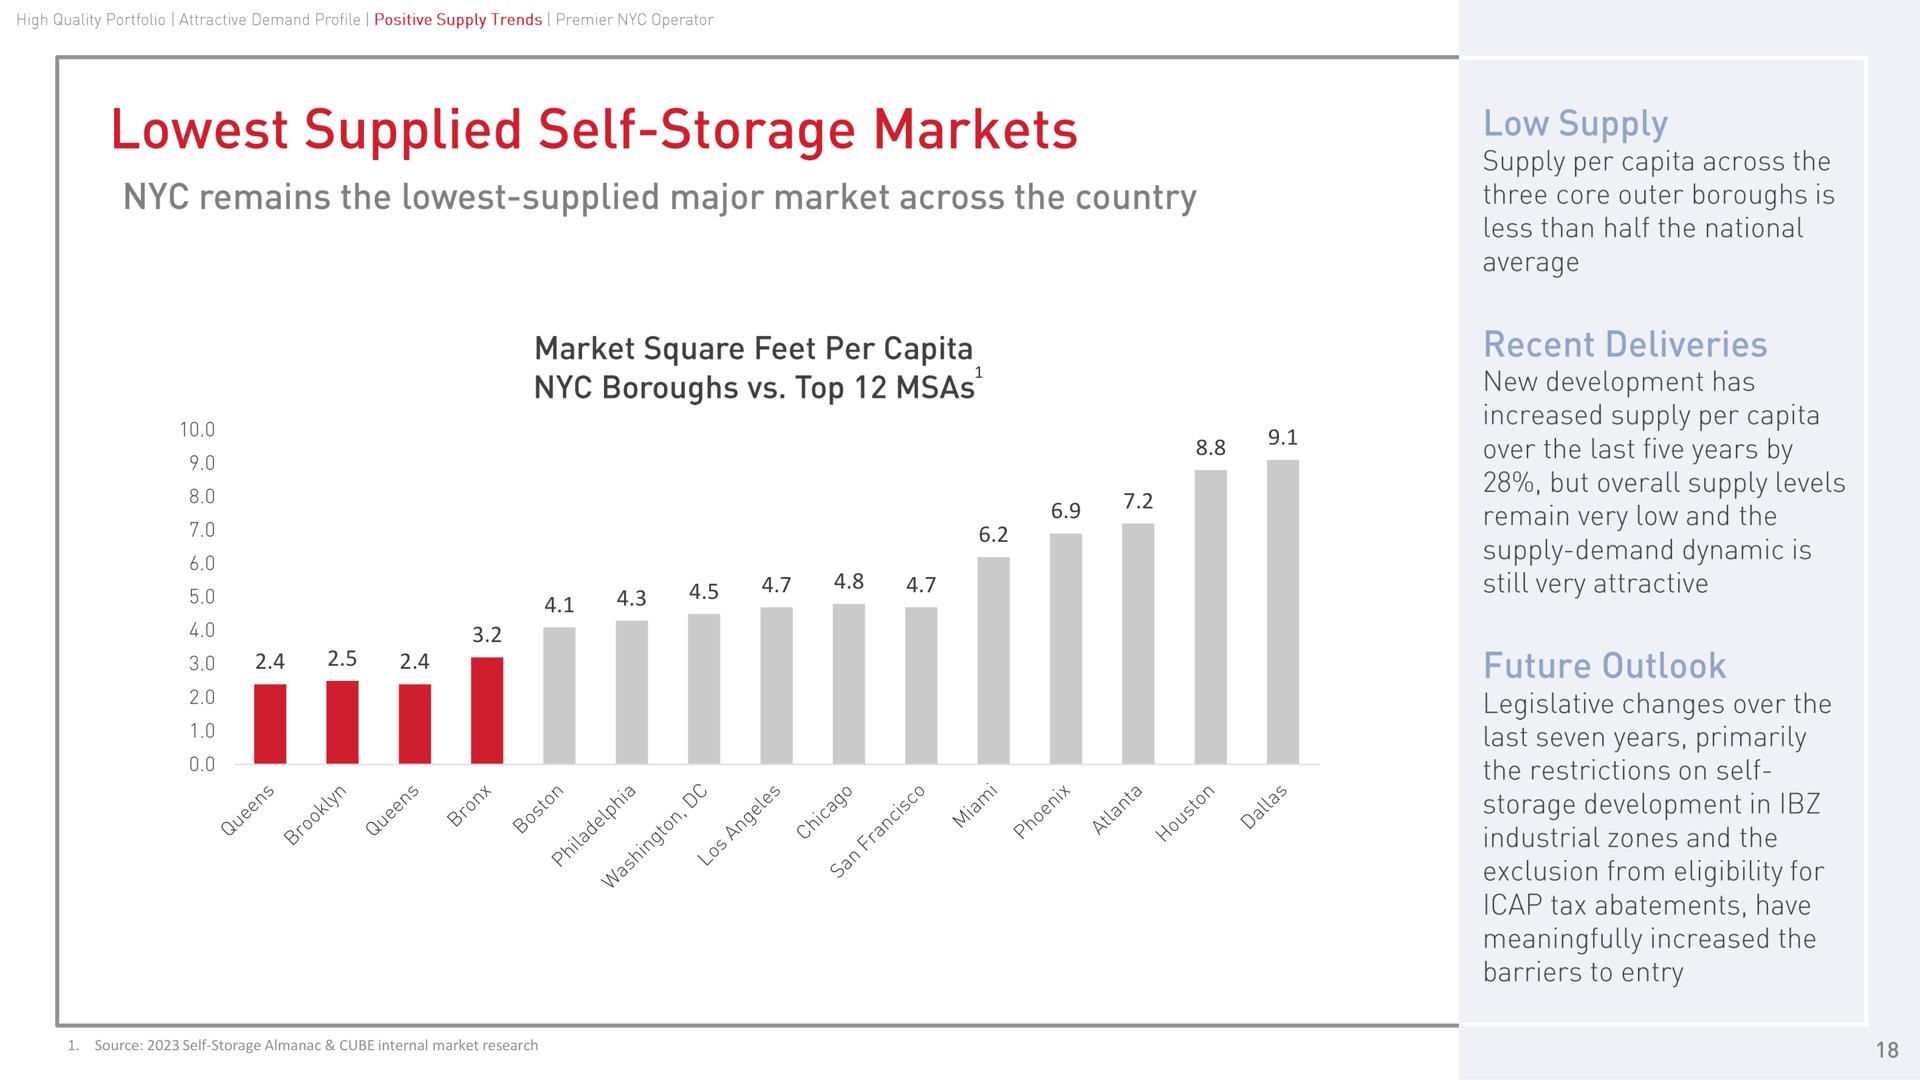 source self storage almanac cube internal market research supplied markets remains the supplied major across the country supe the per across three core outer boroughs is less than half the national average square feet per boroughs top a an an it ses a we fss recent deliveries new development has increased supply per over the last five years by but overall supply levels remain very low and the supply demand dynamic is still very attractive future outlook legislative changes over the last seven years primarily a been industrial zones and the exclusion from eligibility for tax abatements have meaningfully increased the barriers to entry | CubeSmart